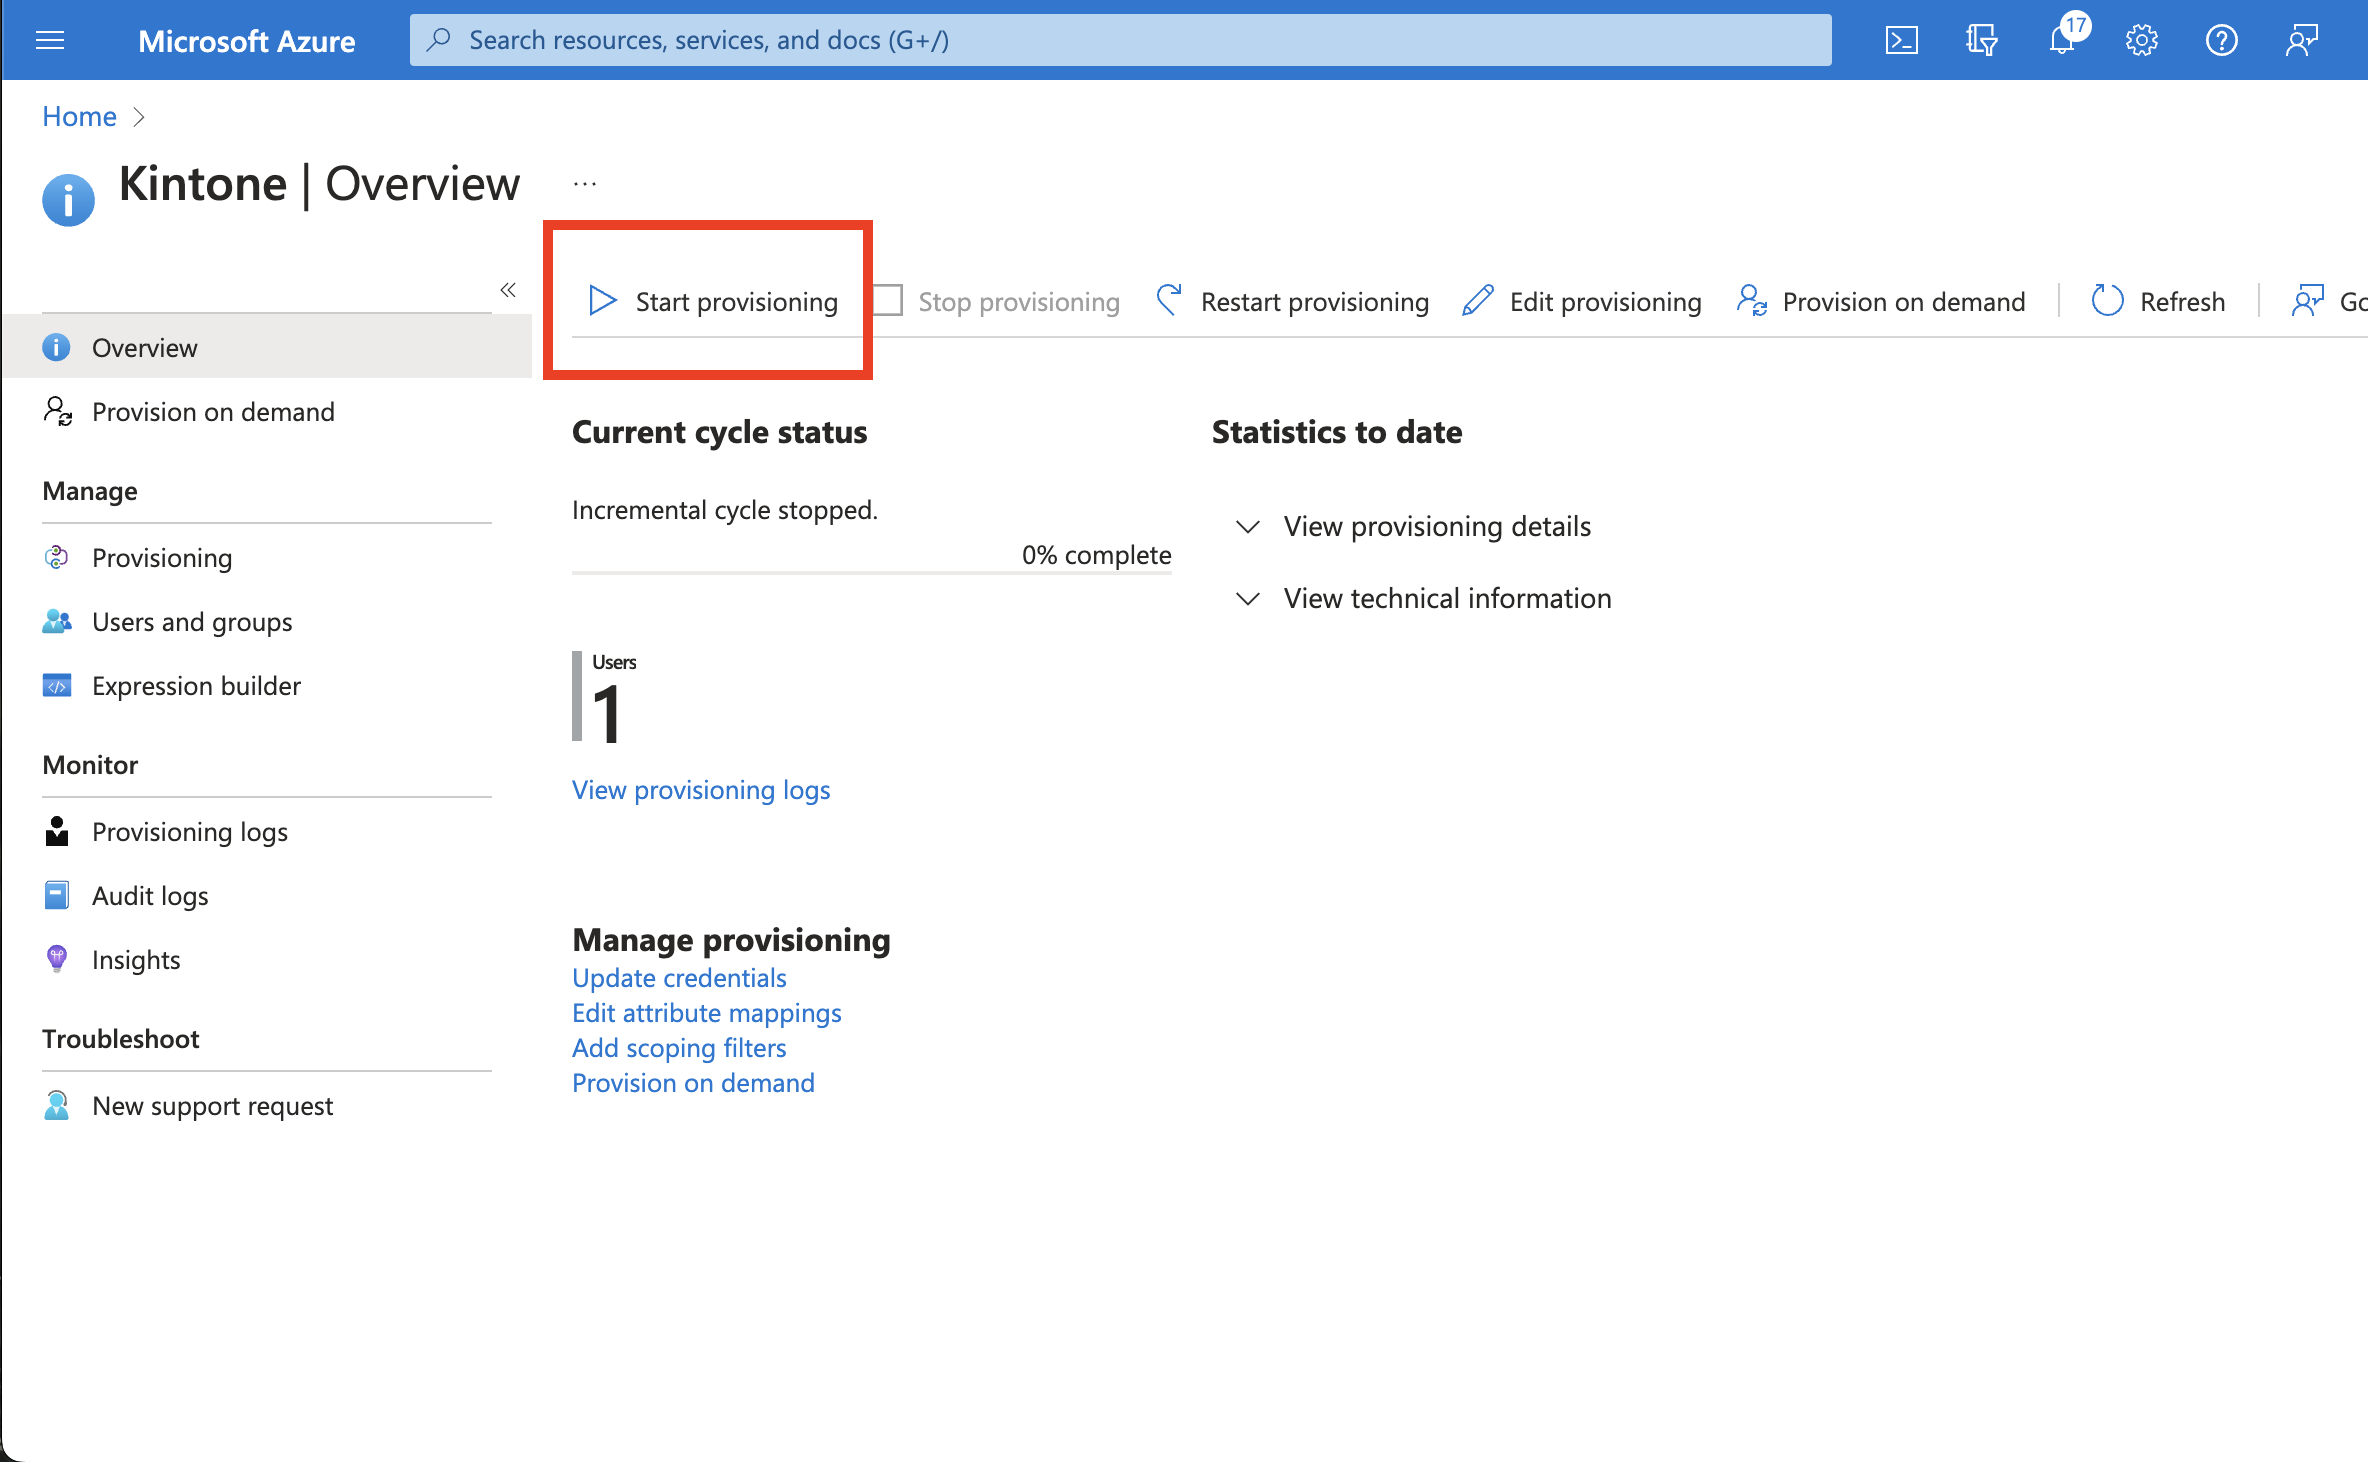 Screenshot: The start provisioning button highlighted on the Azure Portal